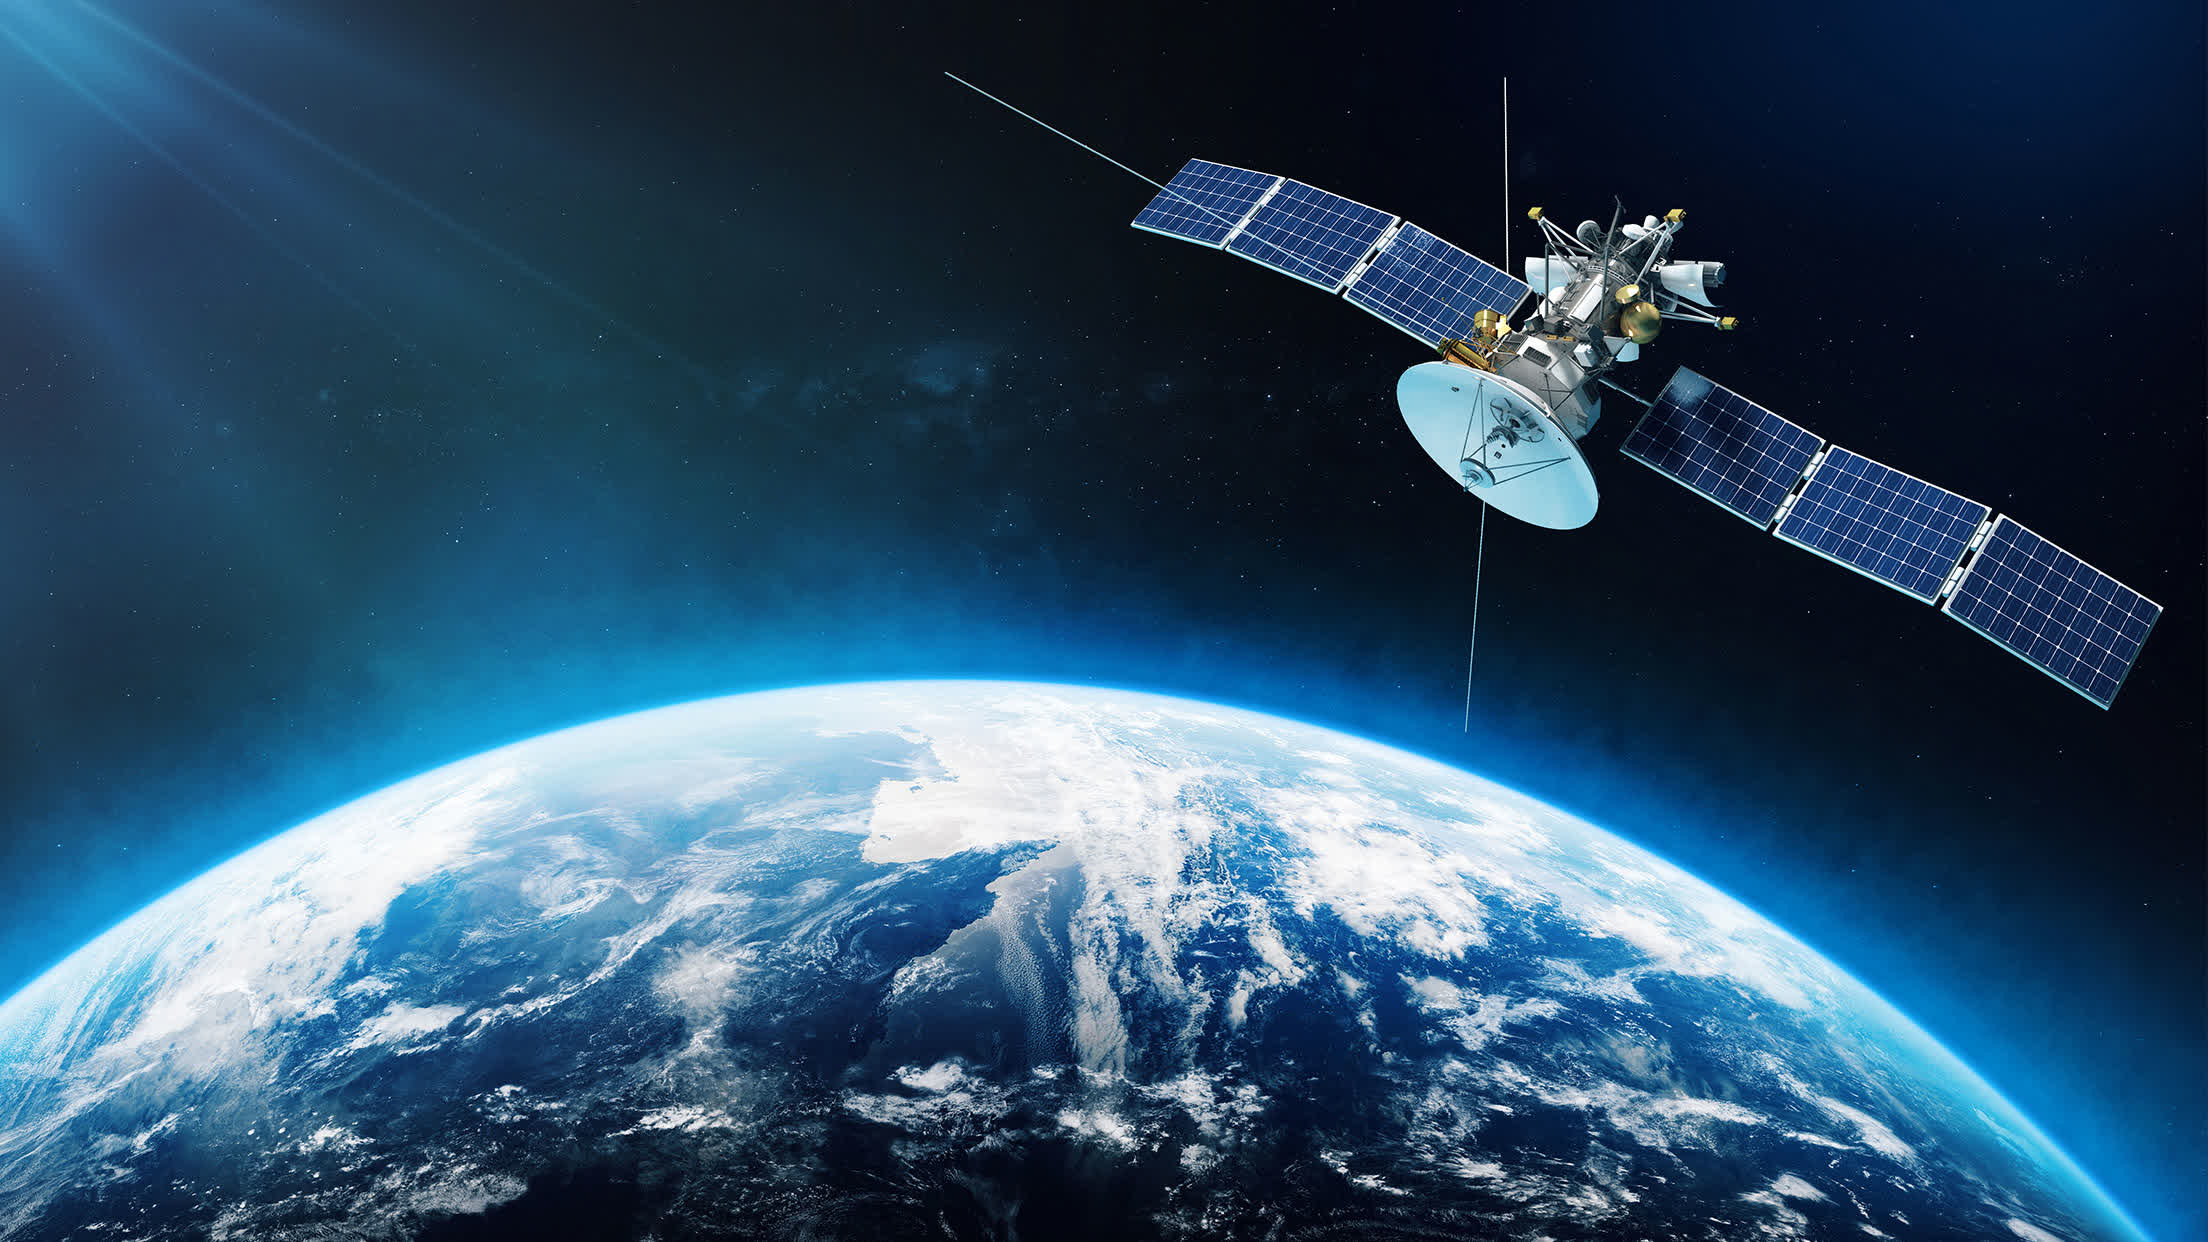 Hack-A-Sat 4 contest will let white hat hackers toy with a satellite in space